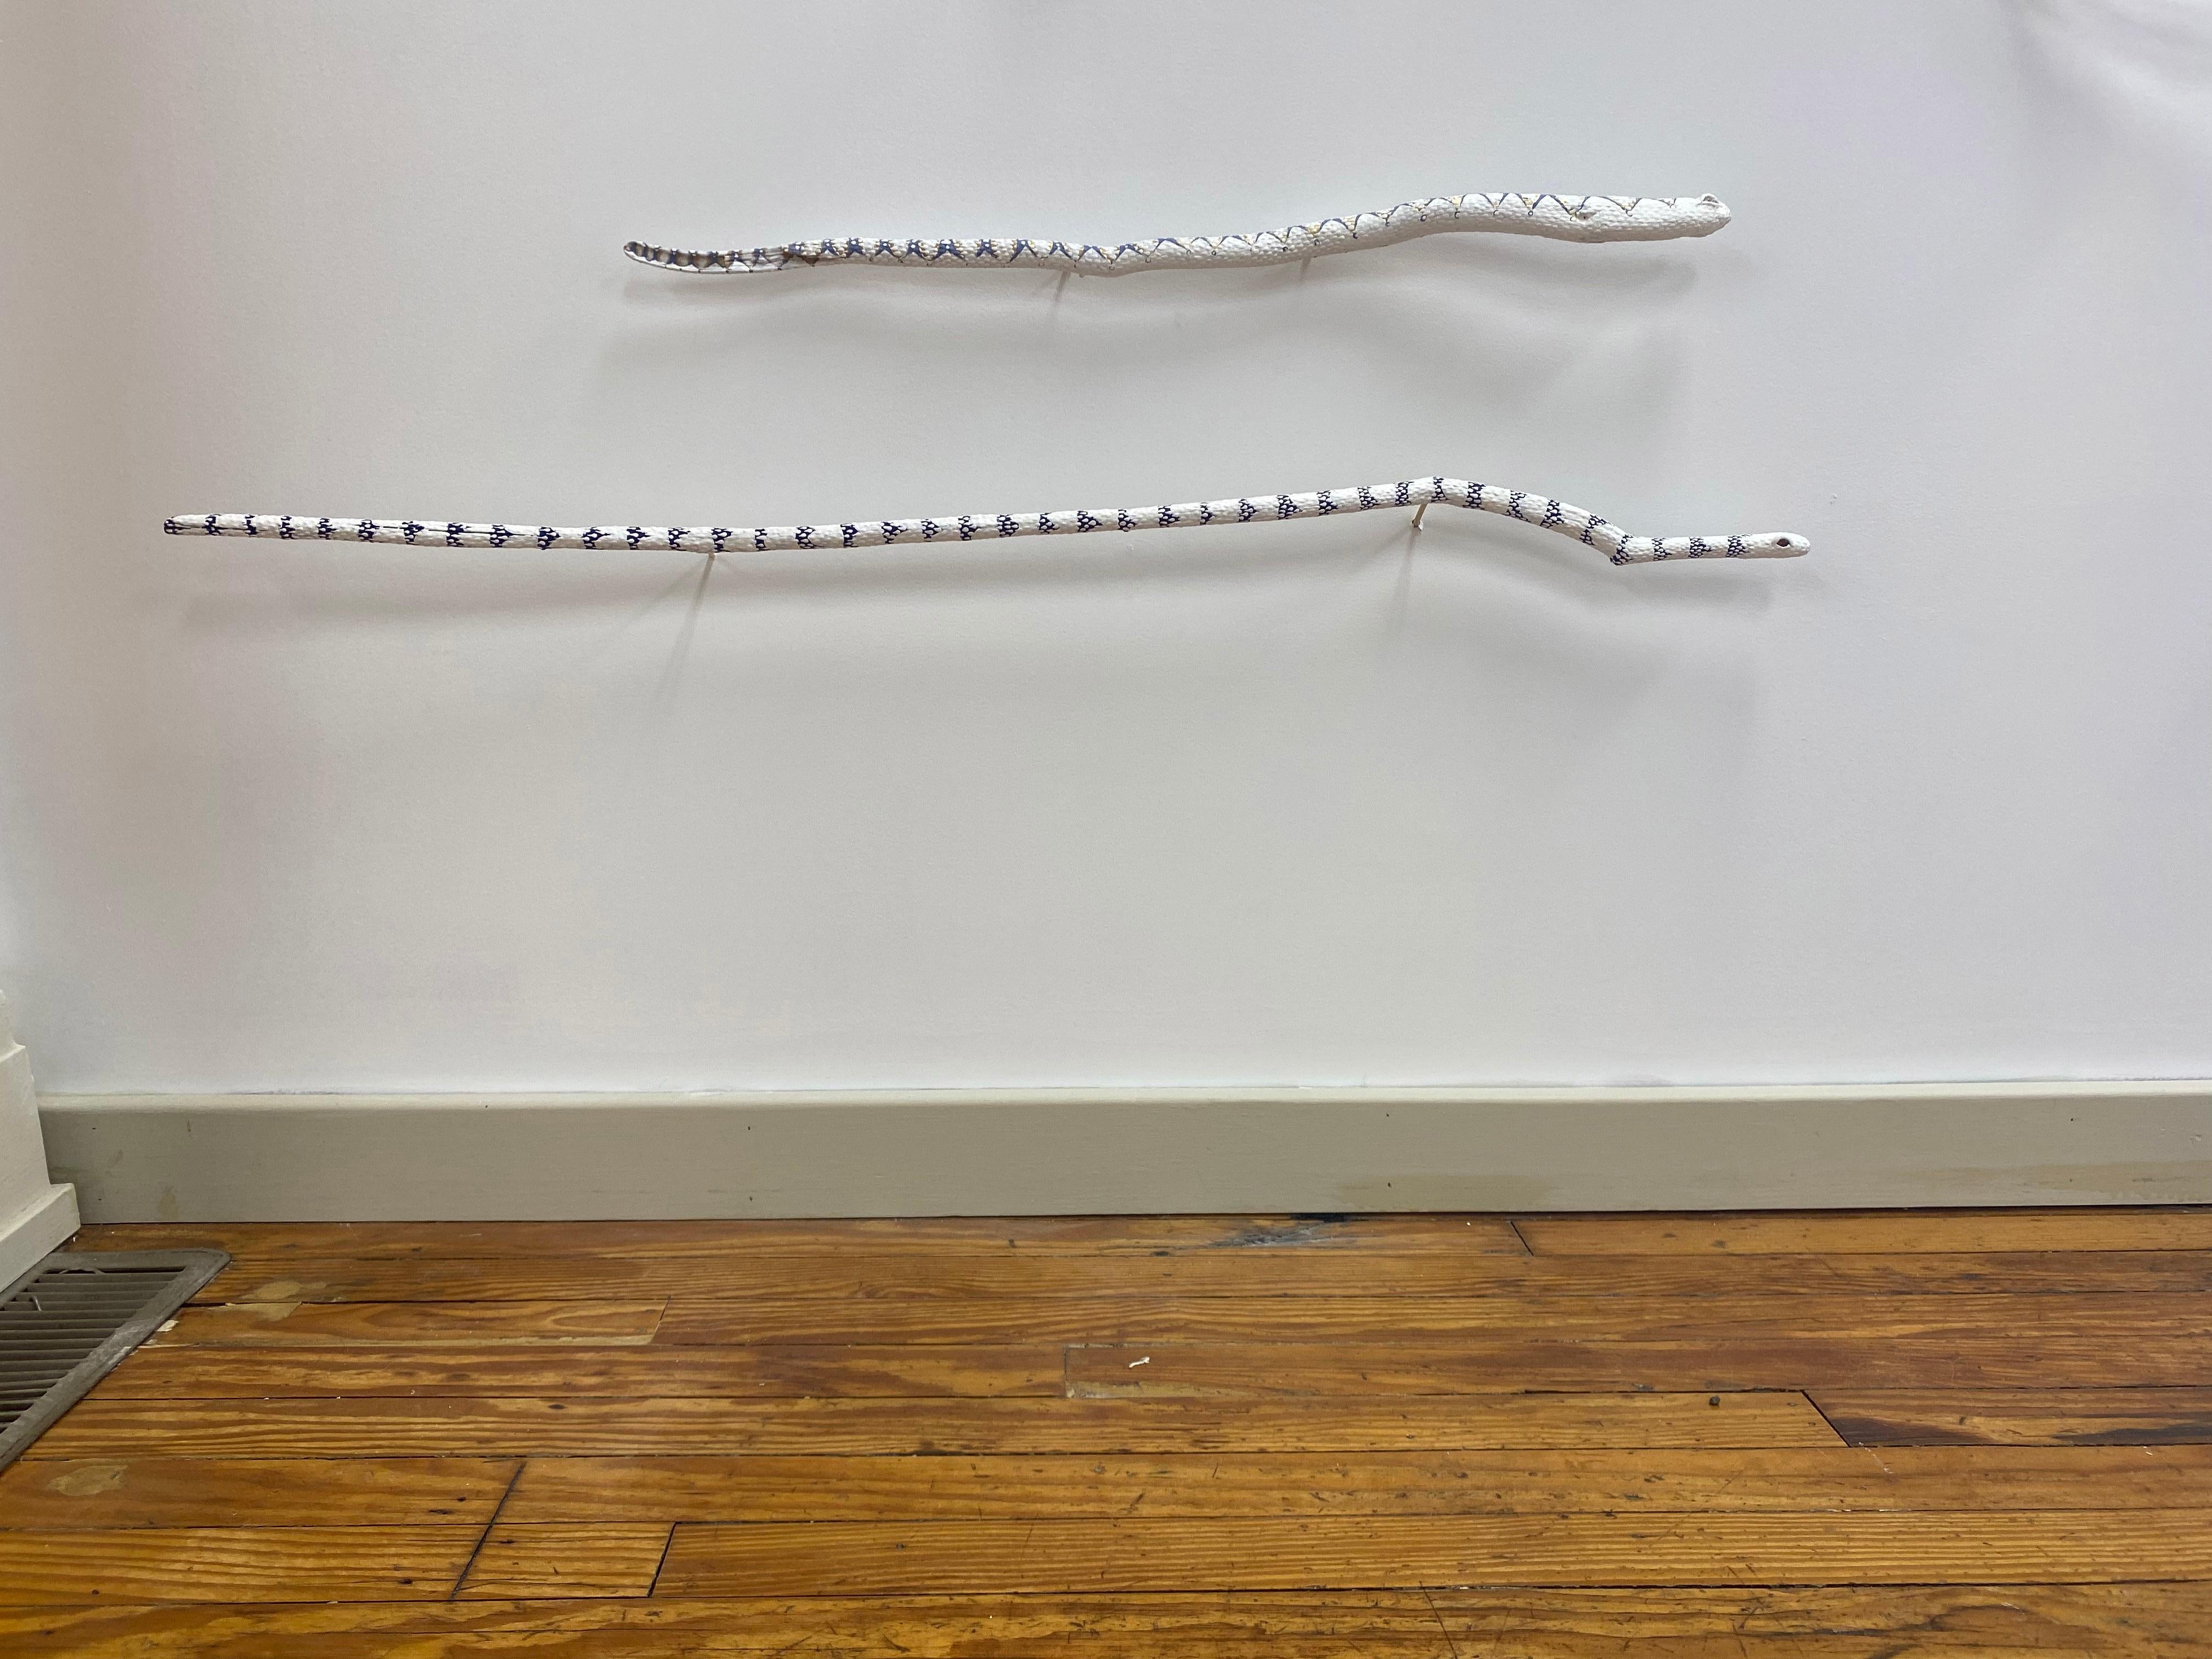 An original sculptural installation by contemporary conceptual American artist Bethany Krull.

This work titled 